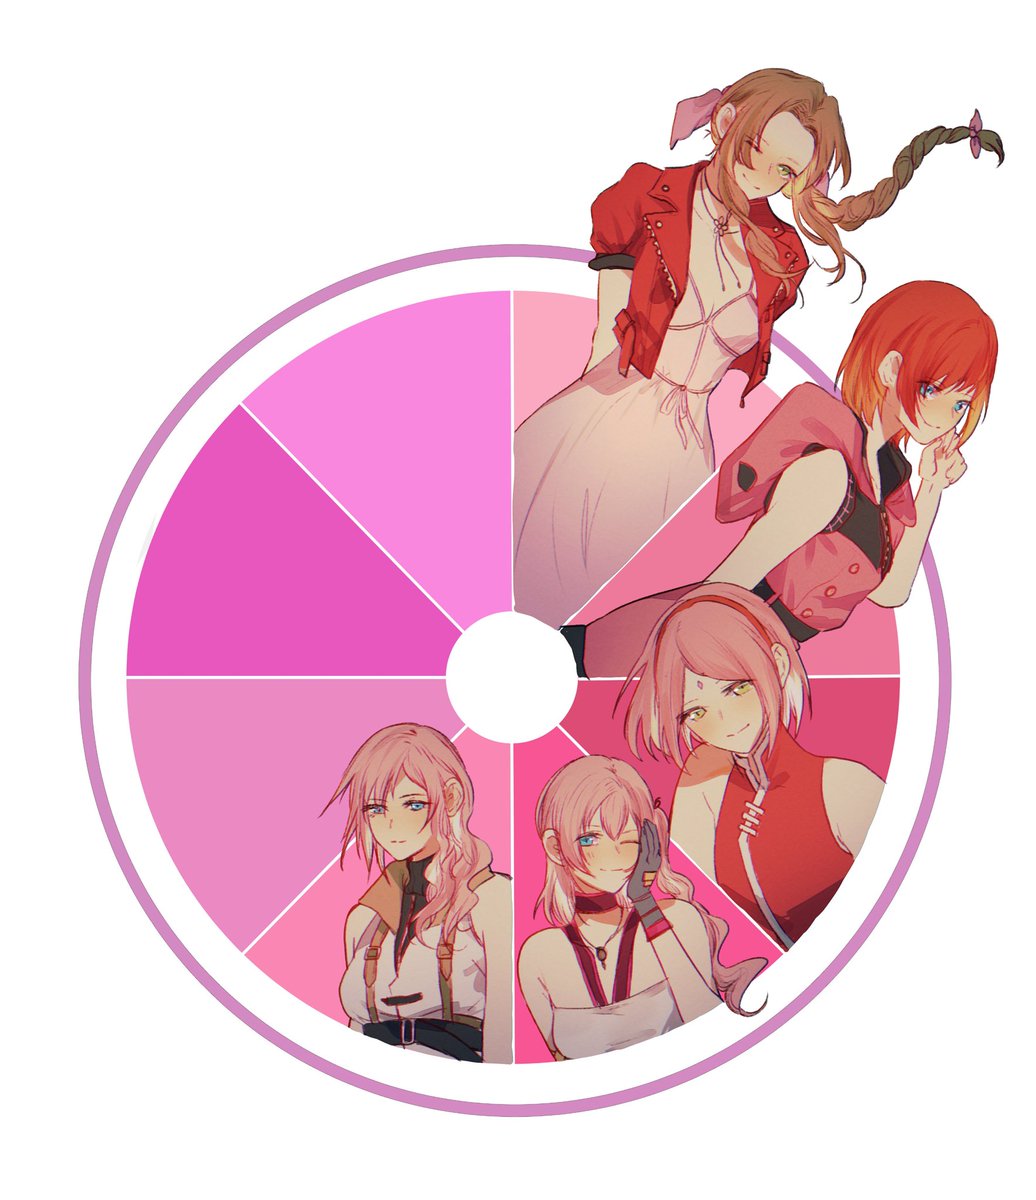 pink wheel speaks to me
any other pink chars? 🎀